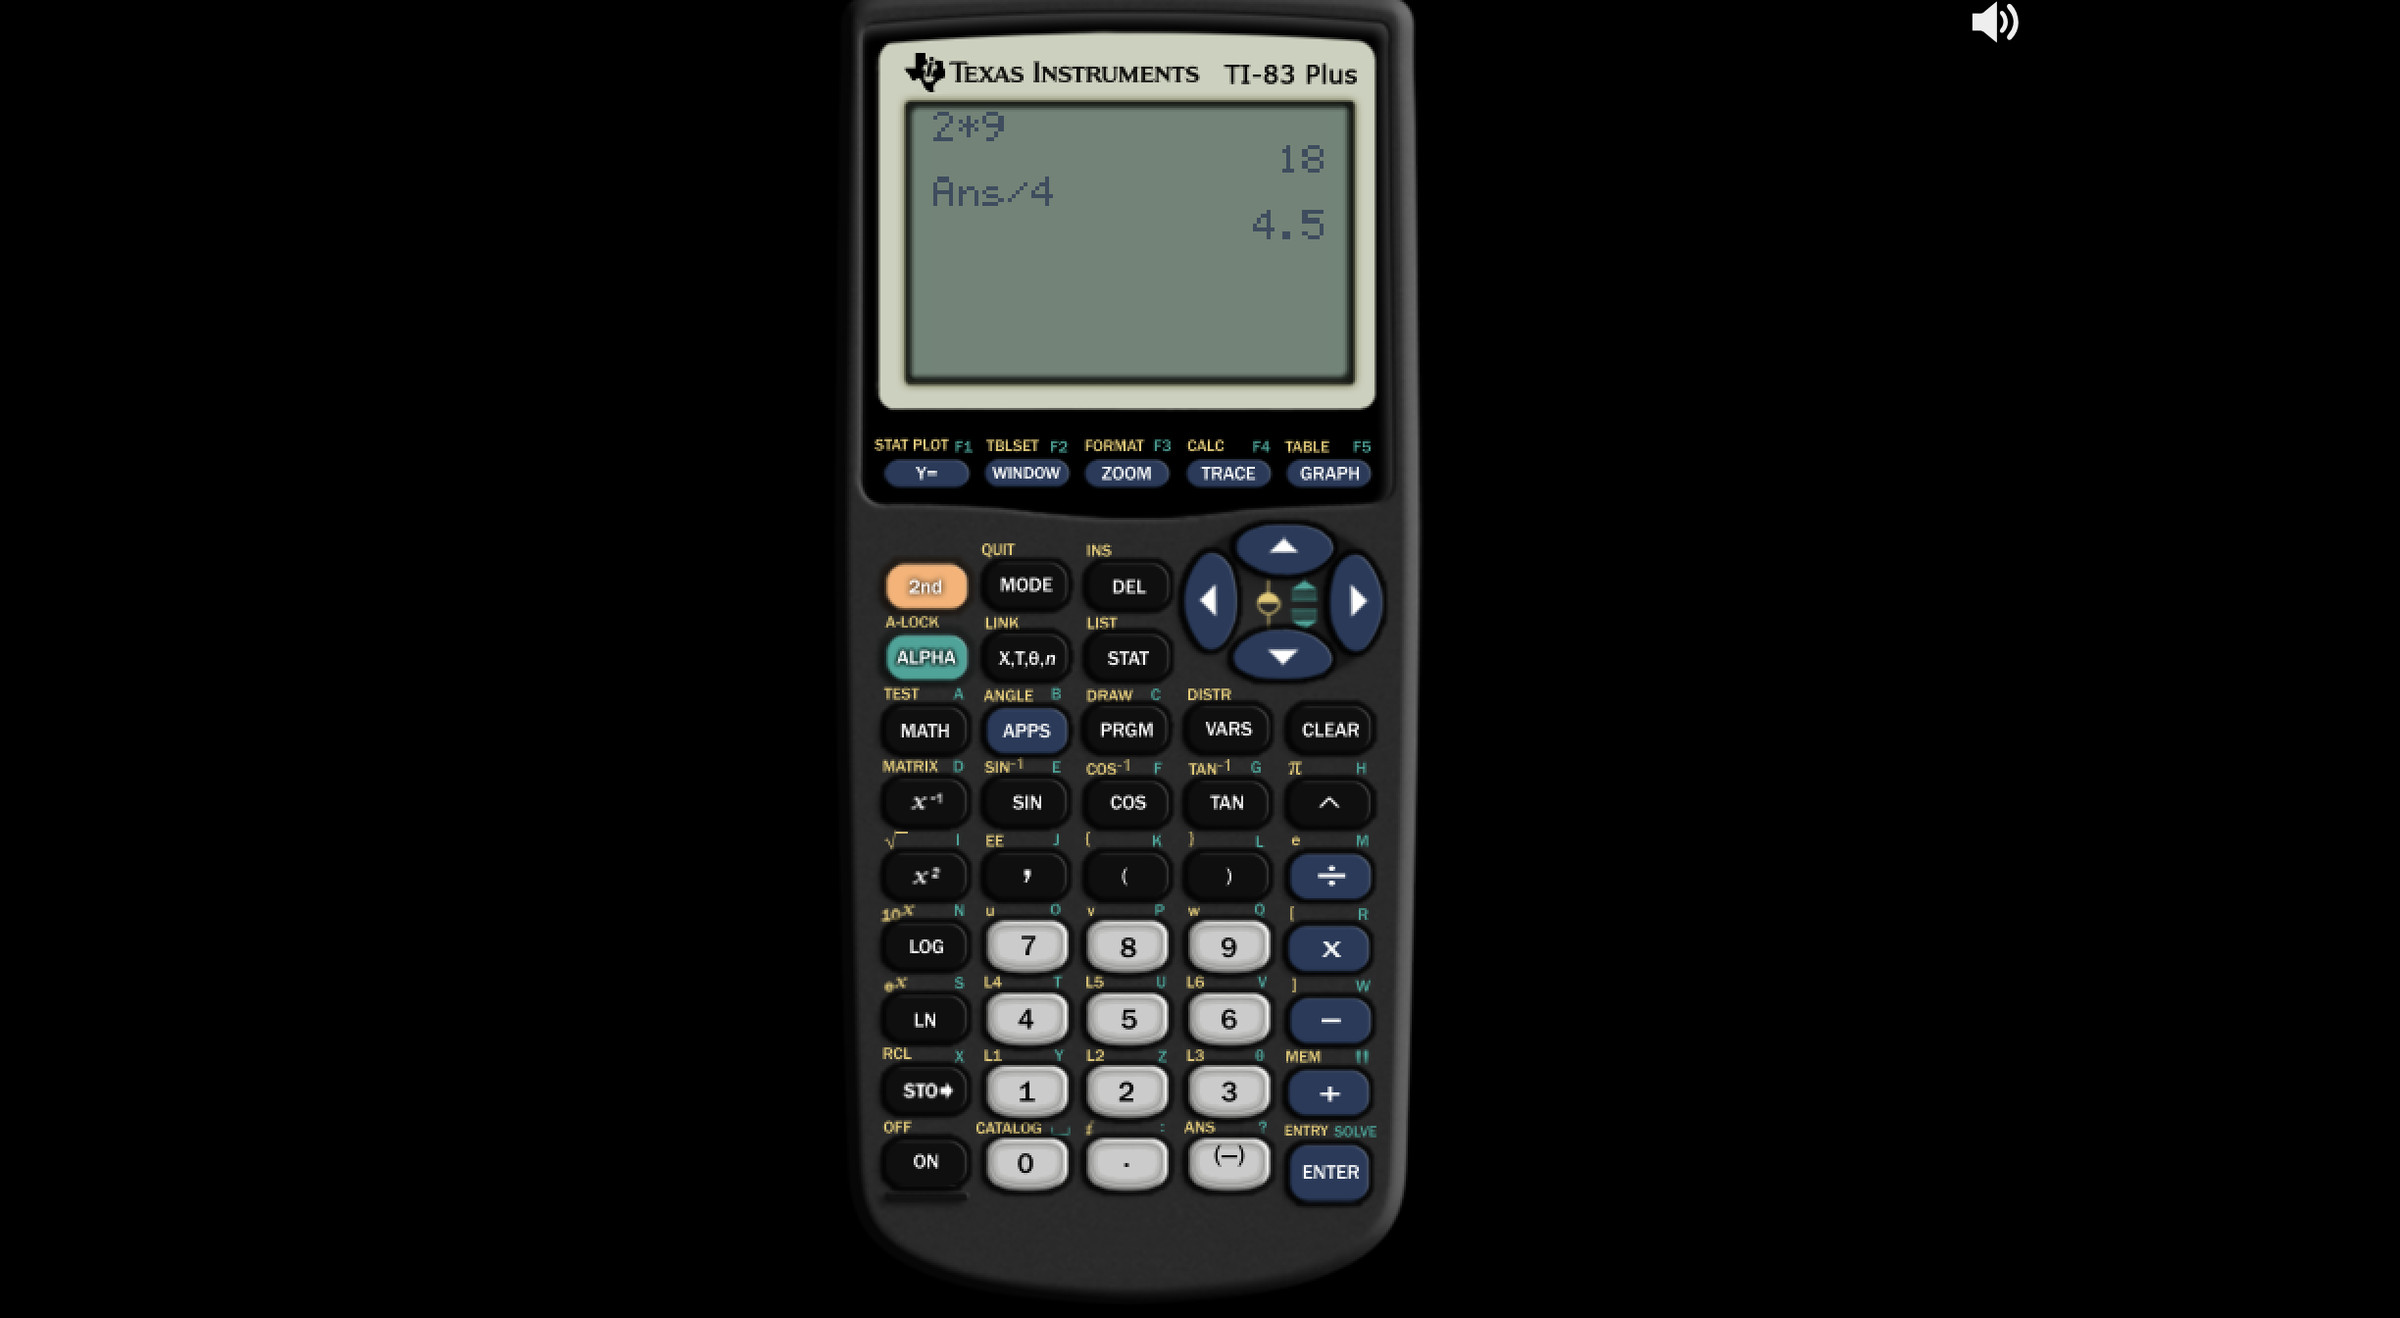 Do some hard math problems on your old TI-83 Plus.